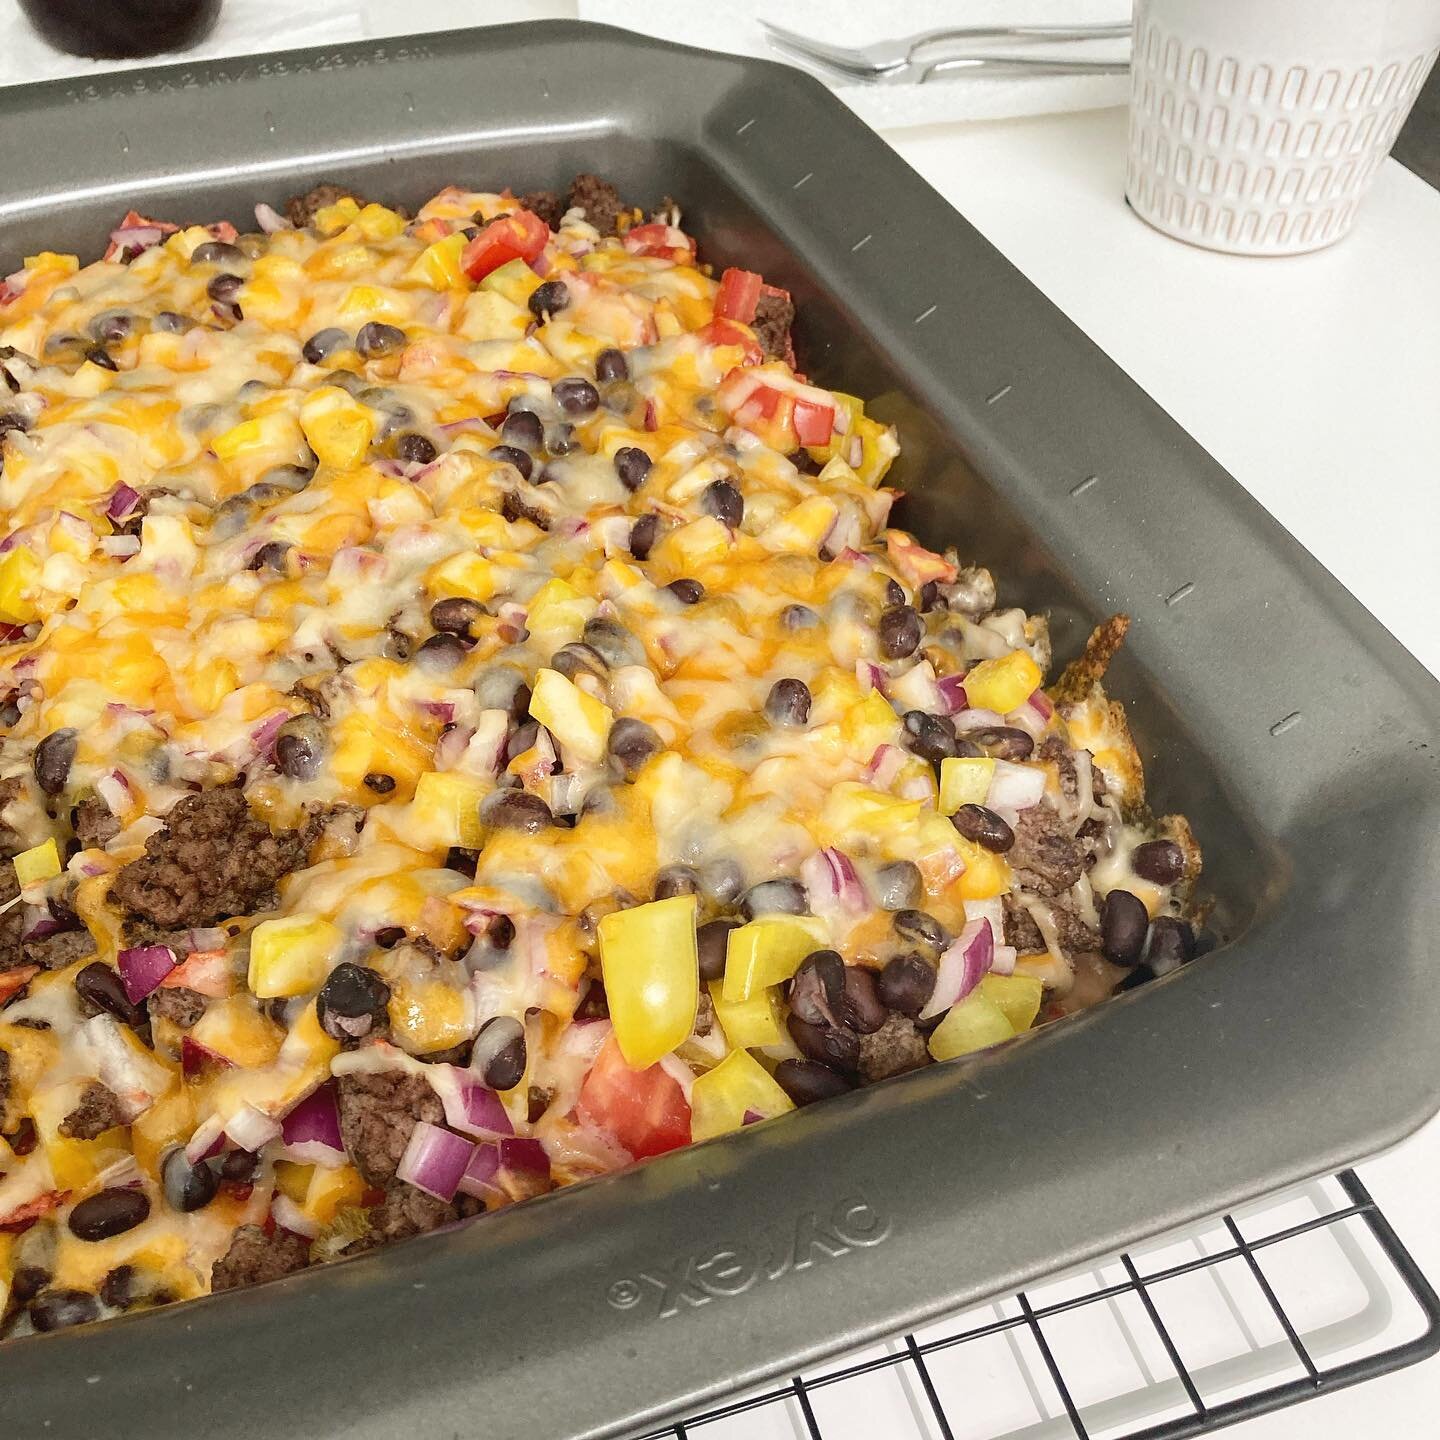 Enjoying some nachos while watching Euro 2020 ⚽️ These nachos are loaded with black beans, ground beef, chopped bell pepper, tomato, red onion and topped with grated cheese 😍⁣
⁣
Fun Fact: before I took up running competitively, I played soccer for 1